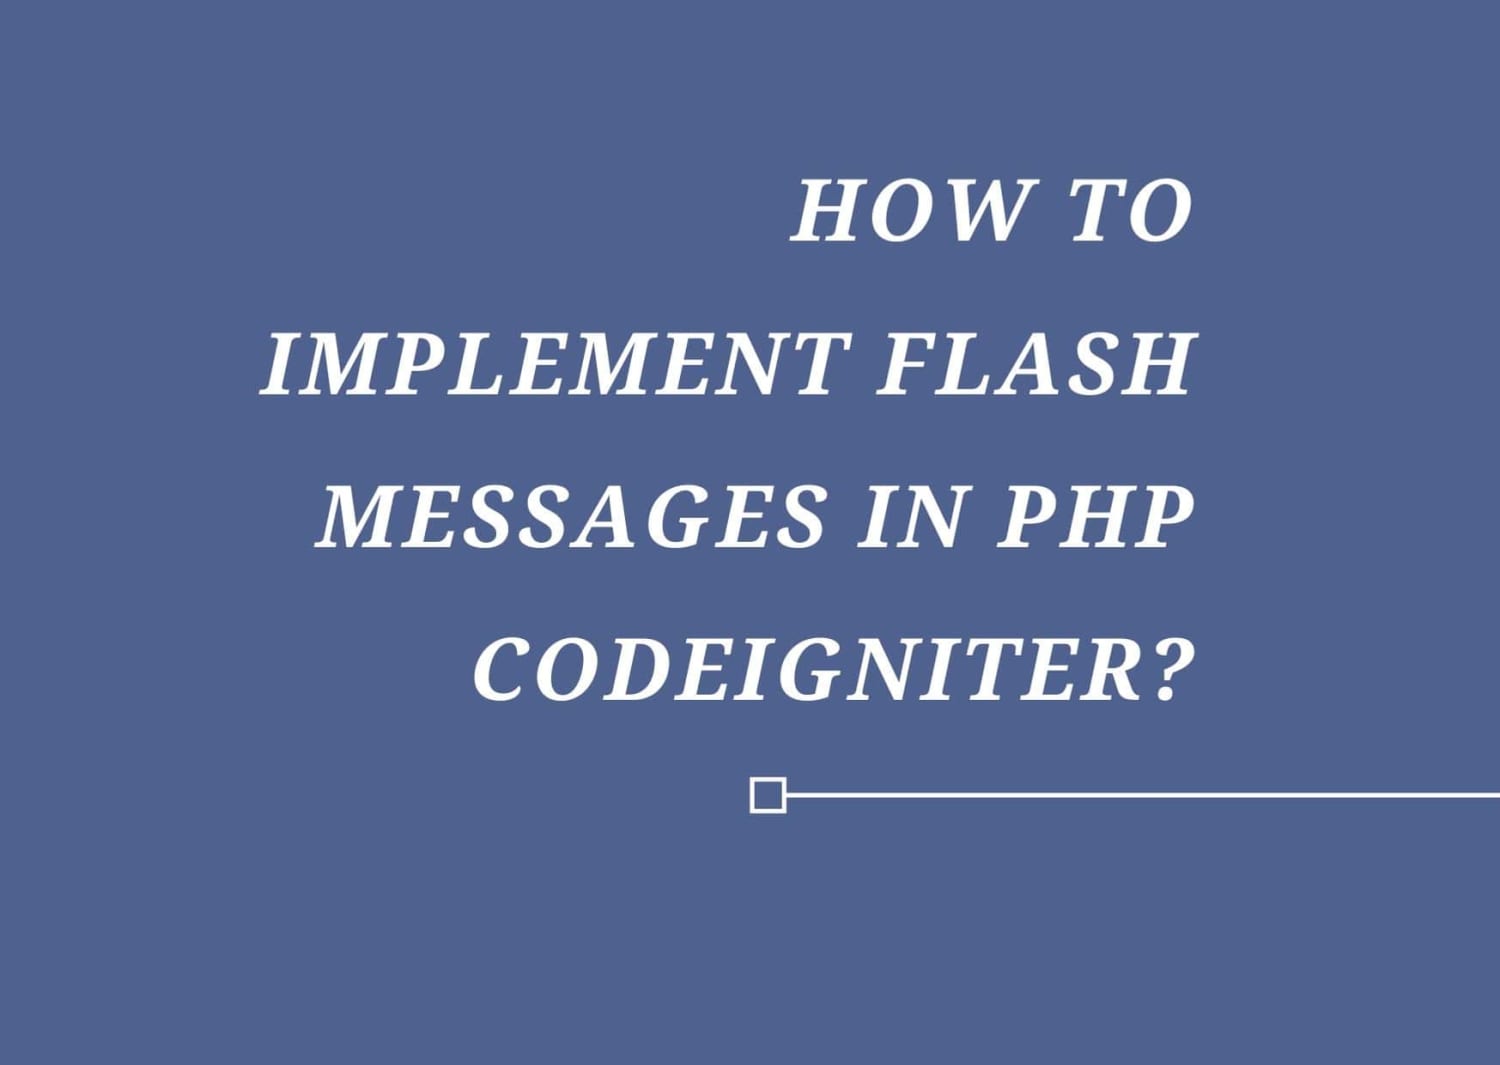 How to show success message in codeigniter?